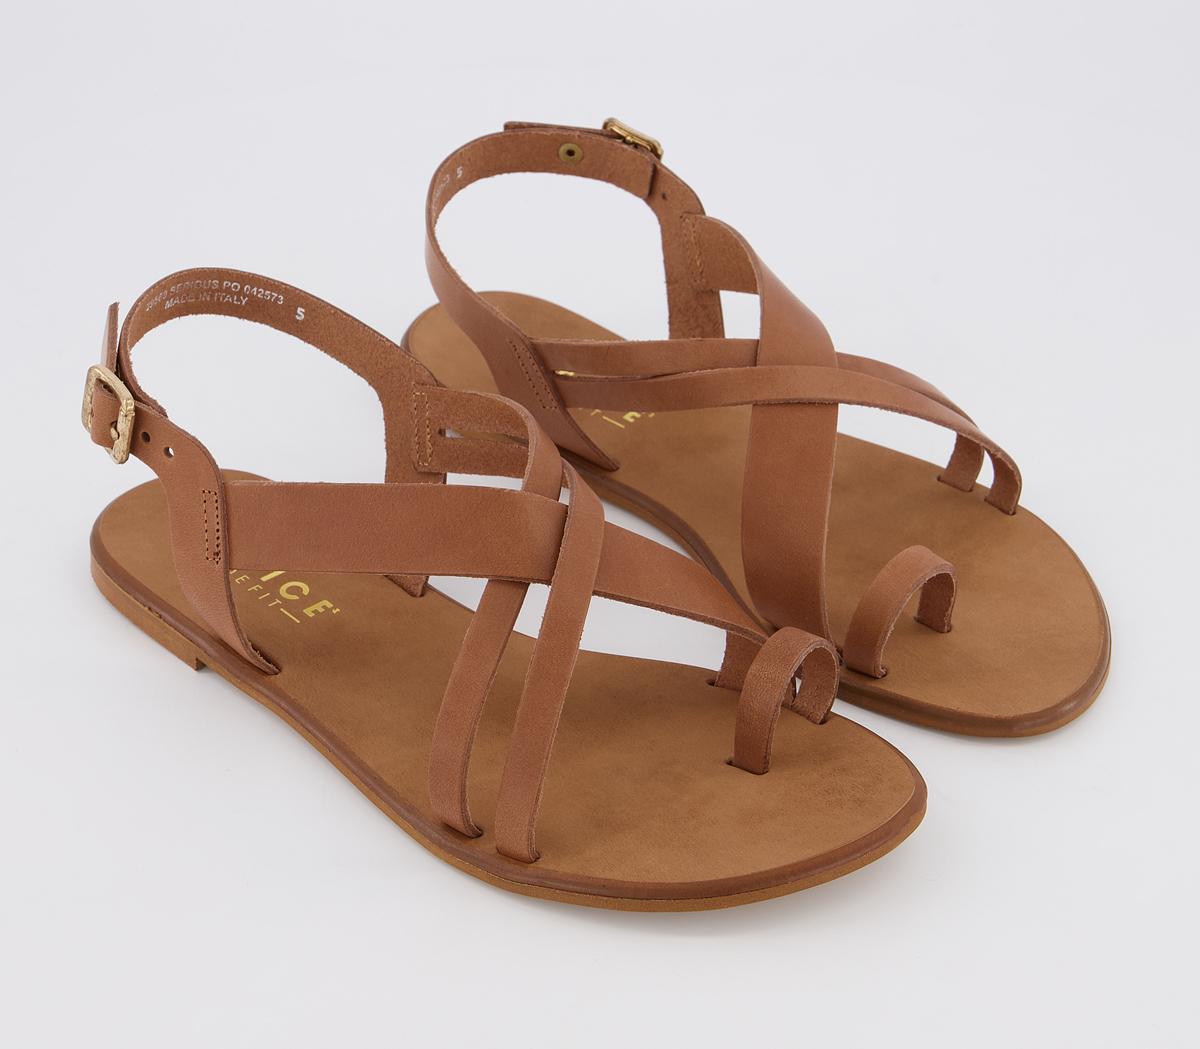 Office Serious Tan Toe Loop Sandals Tan Leather - Women’s Sandals